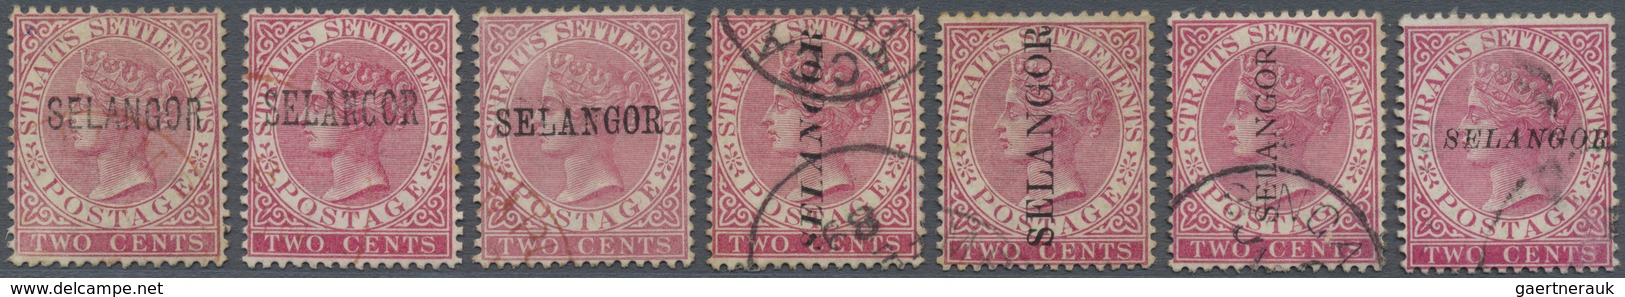 O Malaiische Staaten - Selangor: 1885/1891, Straits Settlements QV 2c. Pale Or Bright Rose With Wmk. C - Selangor